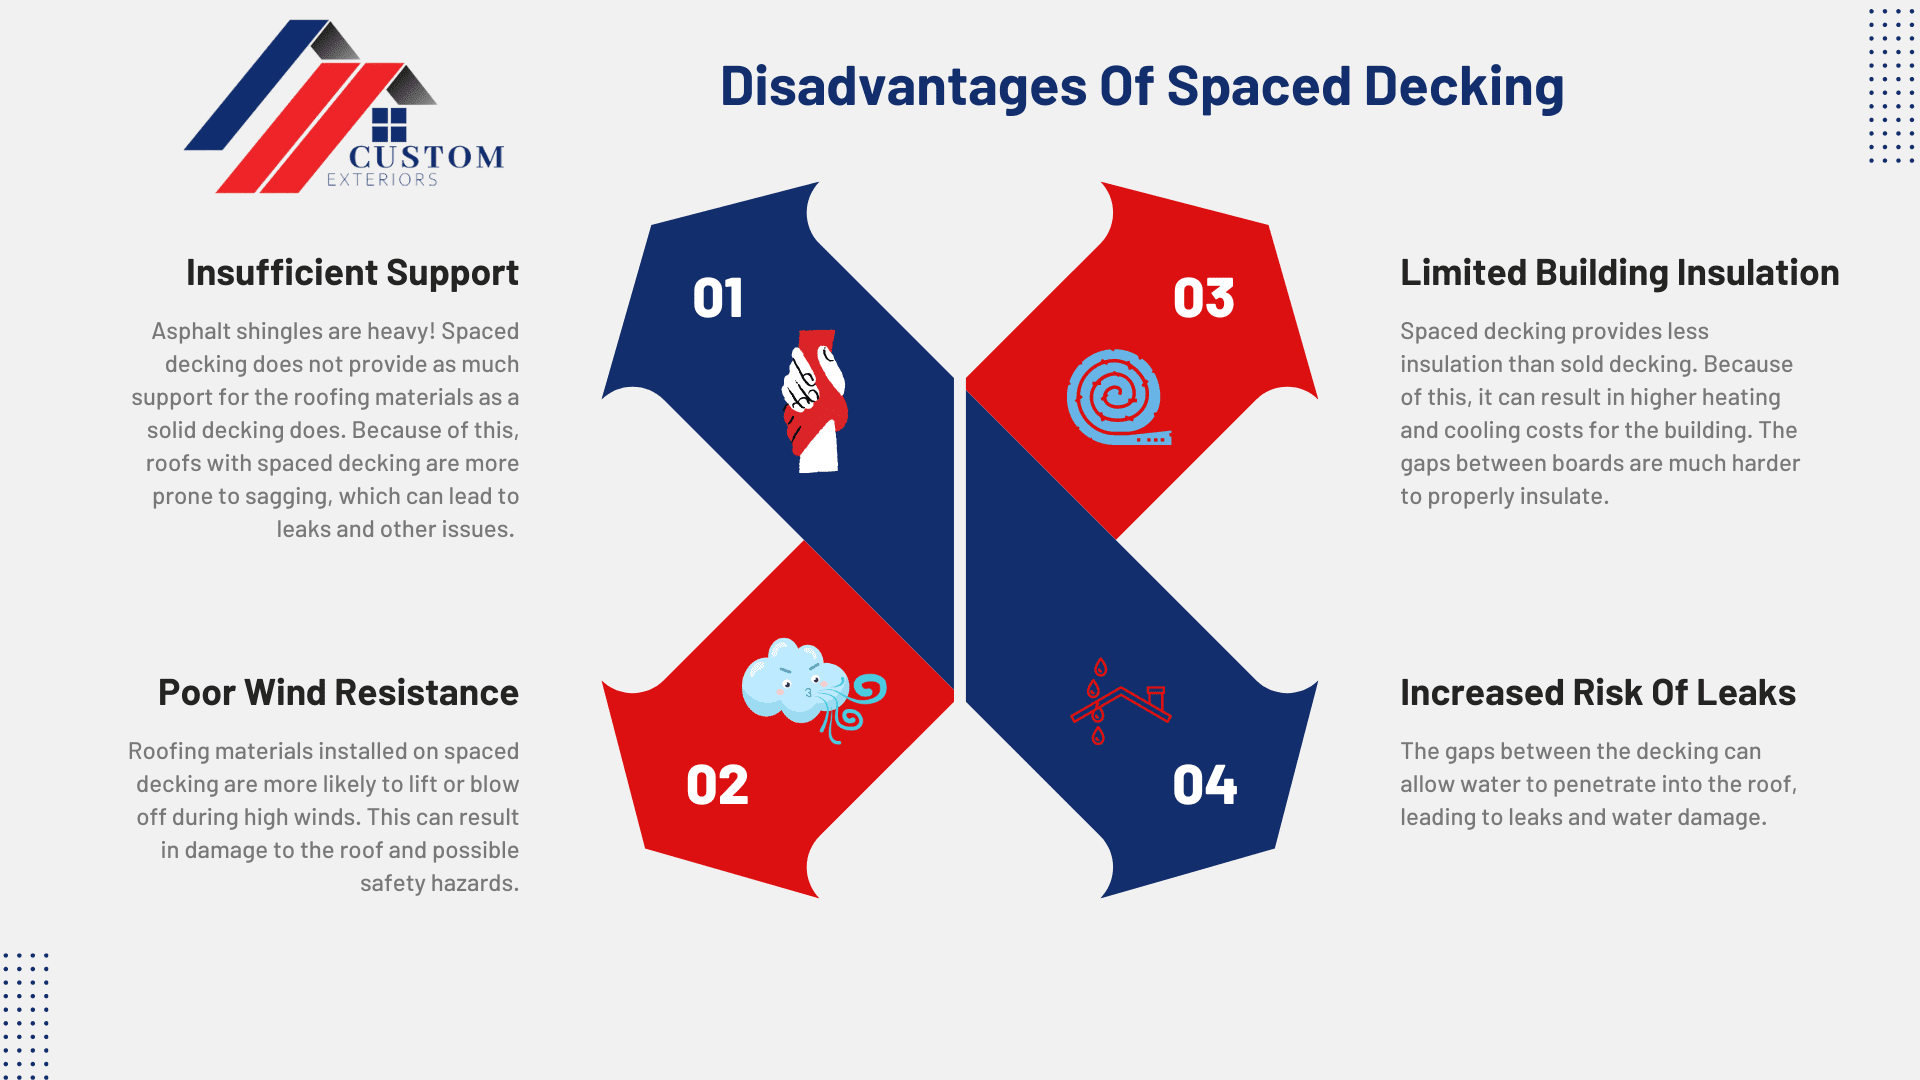 The disadvantages of spaced decking